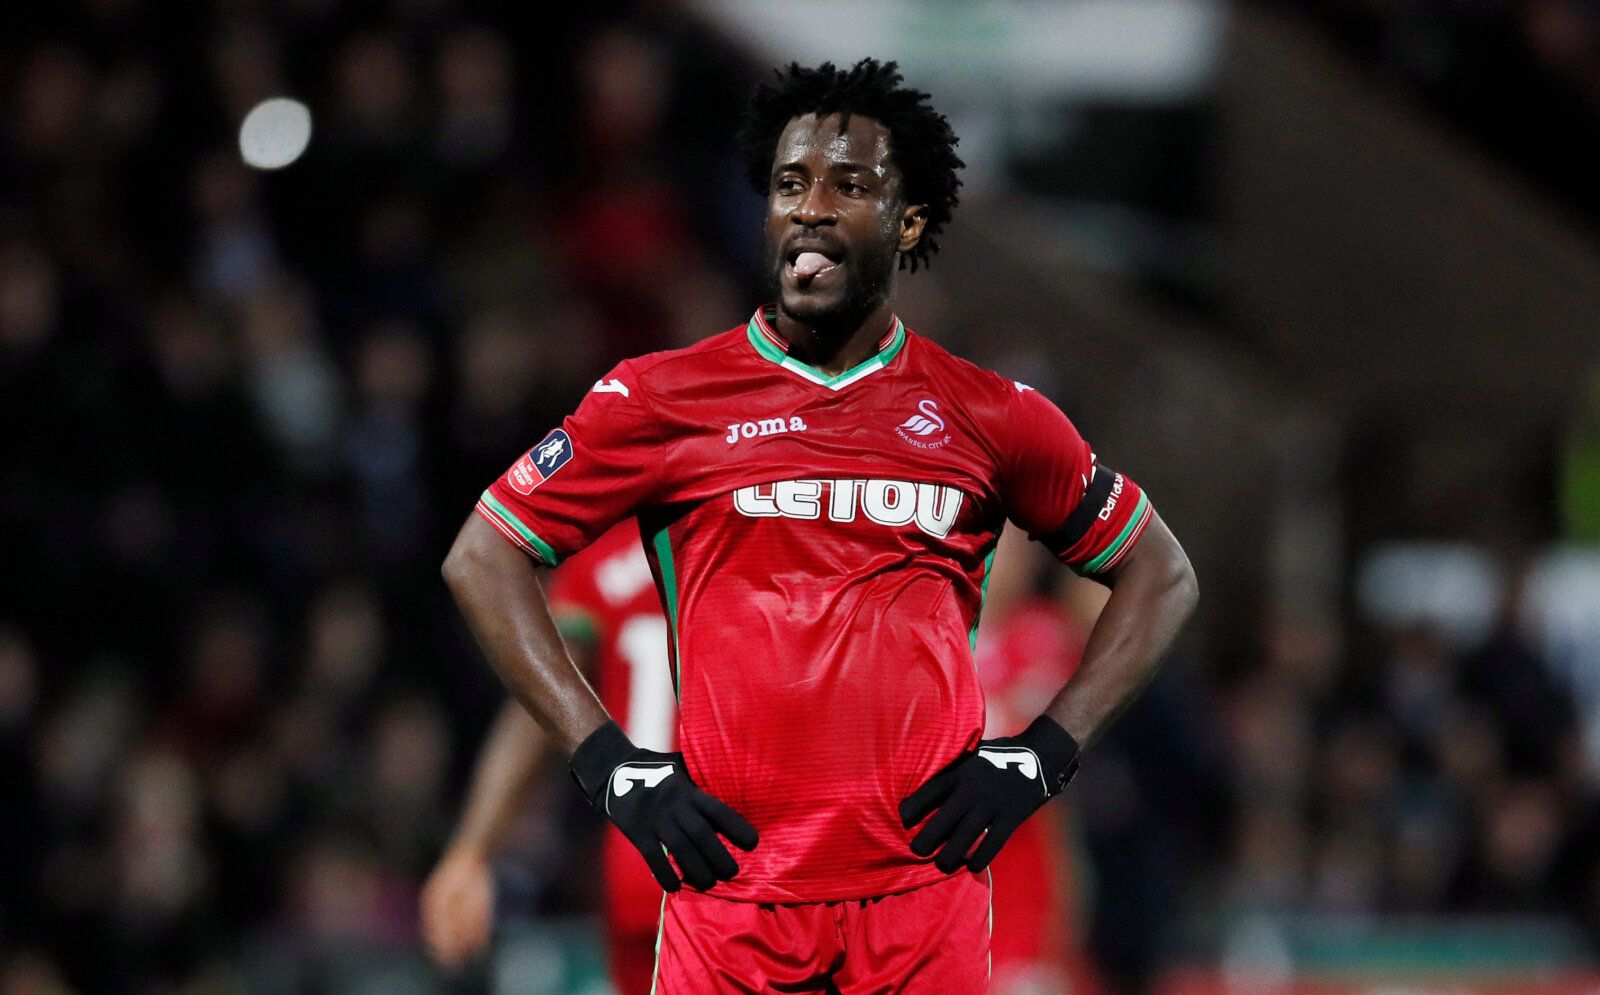 Soccer Football - FA Cup Fourth Round - Notts County vs Swansea City - Meadow Lane, Nottingham, Britain - January 27, 2018   Swansea City’s Wilfried Bony looks dejected    REUTERS/David Klein